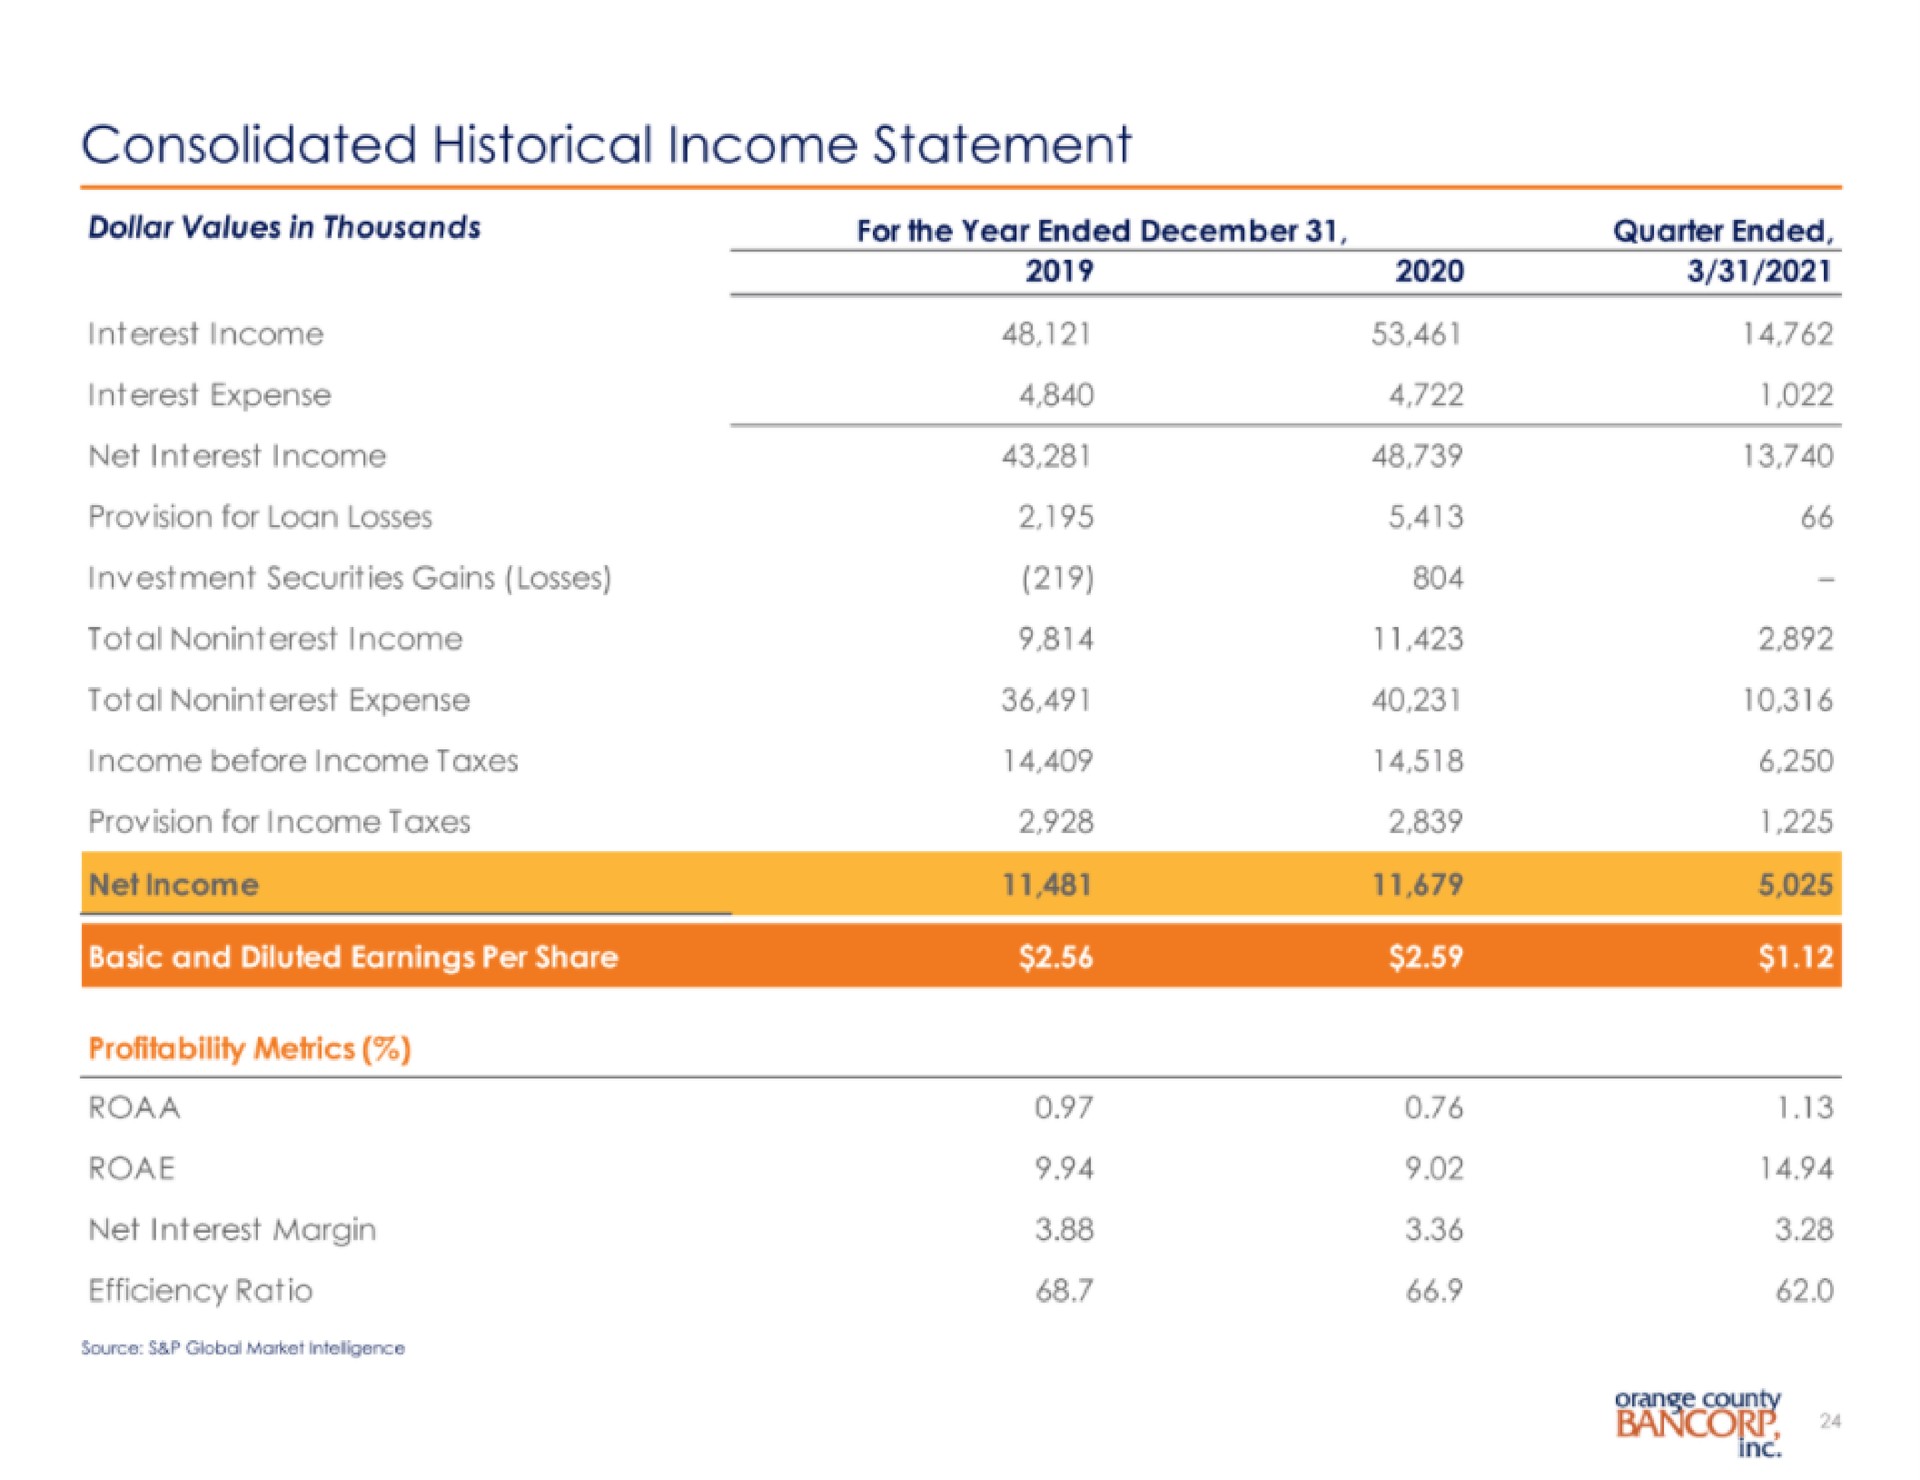 consolidated historical income statement | Orange County Bancorp